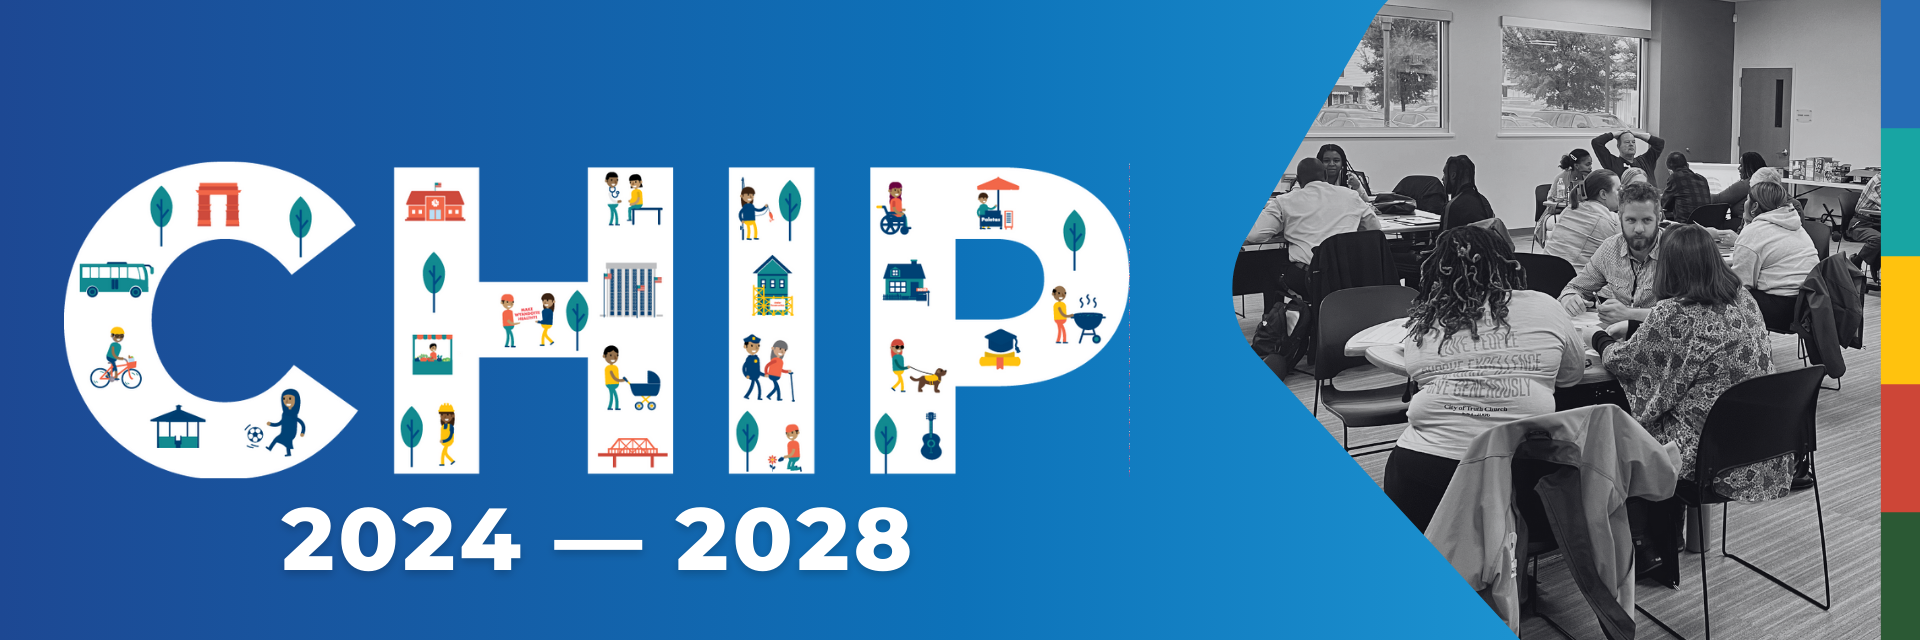 CHIP 2024-2028 Header (1920 x 640 px).png